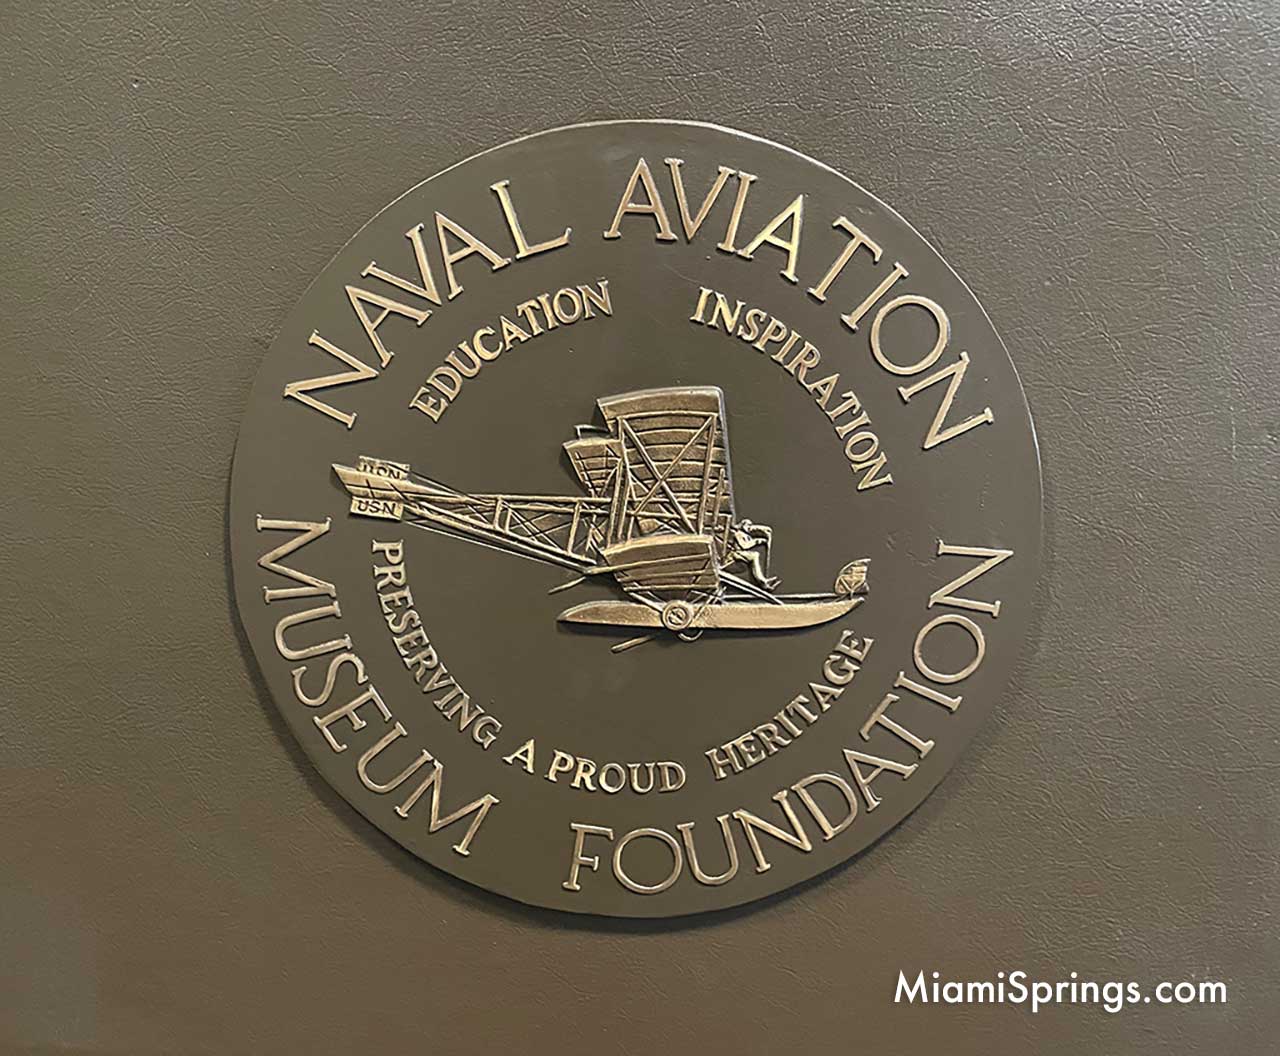 The Naval Aviation Museum Foundation features a Curtiss A-1 Triad.